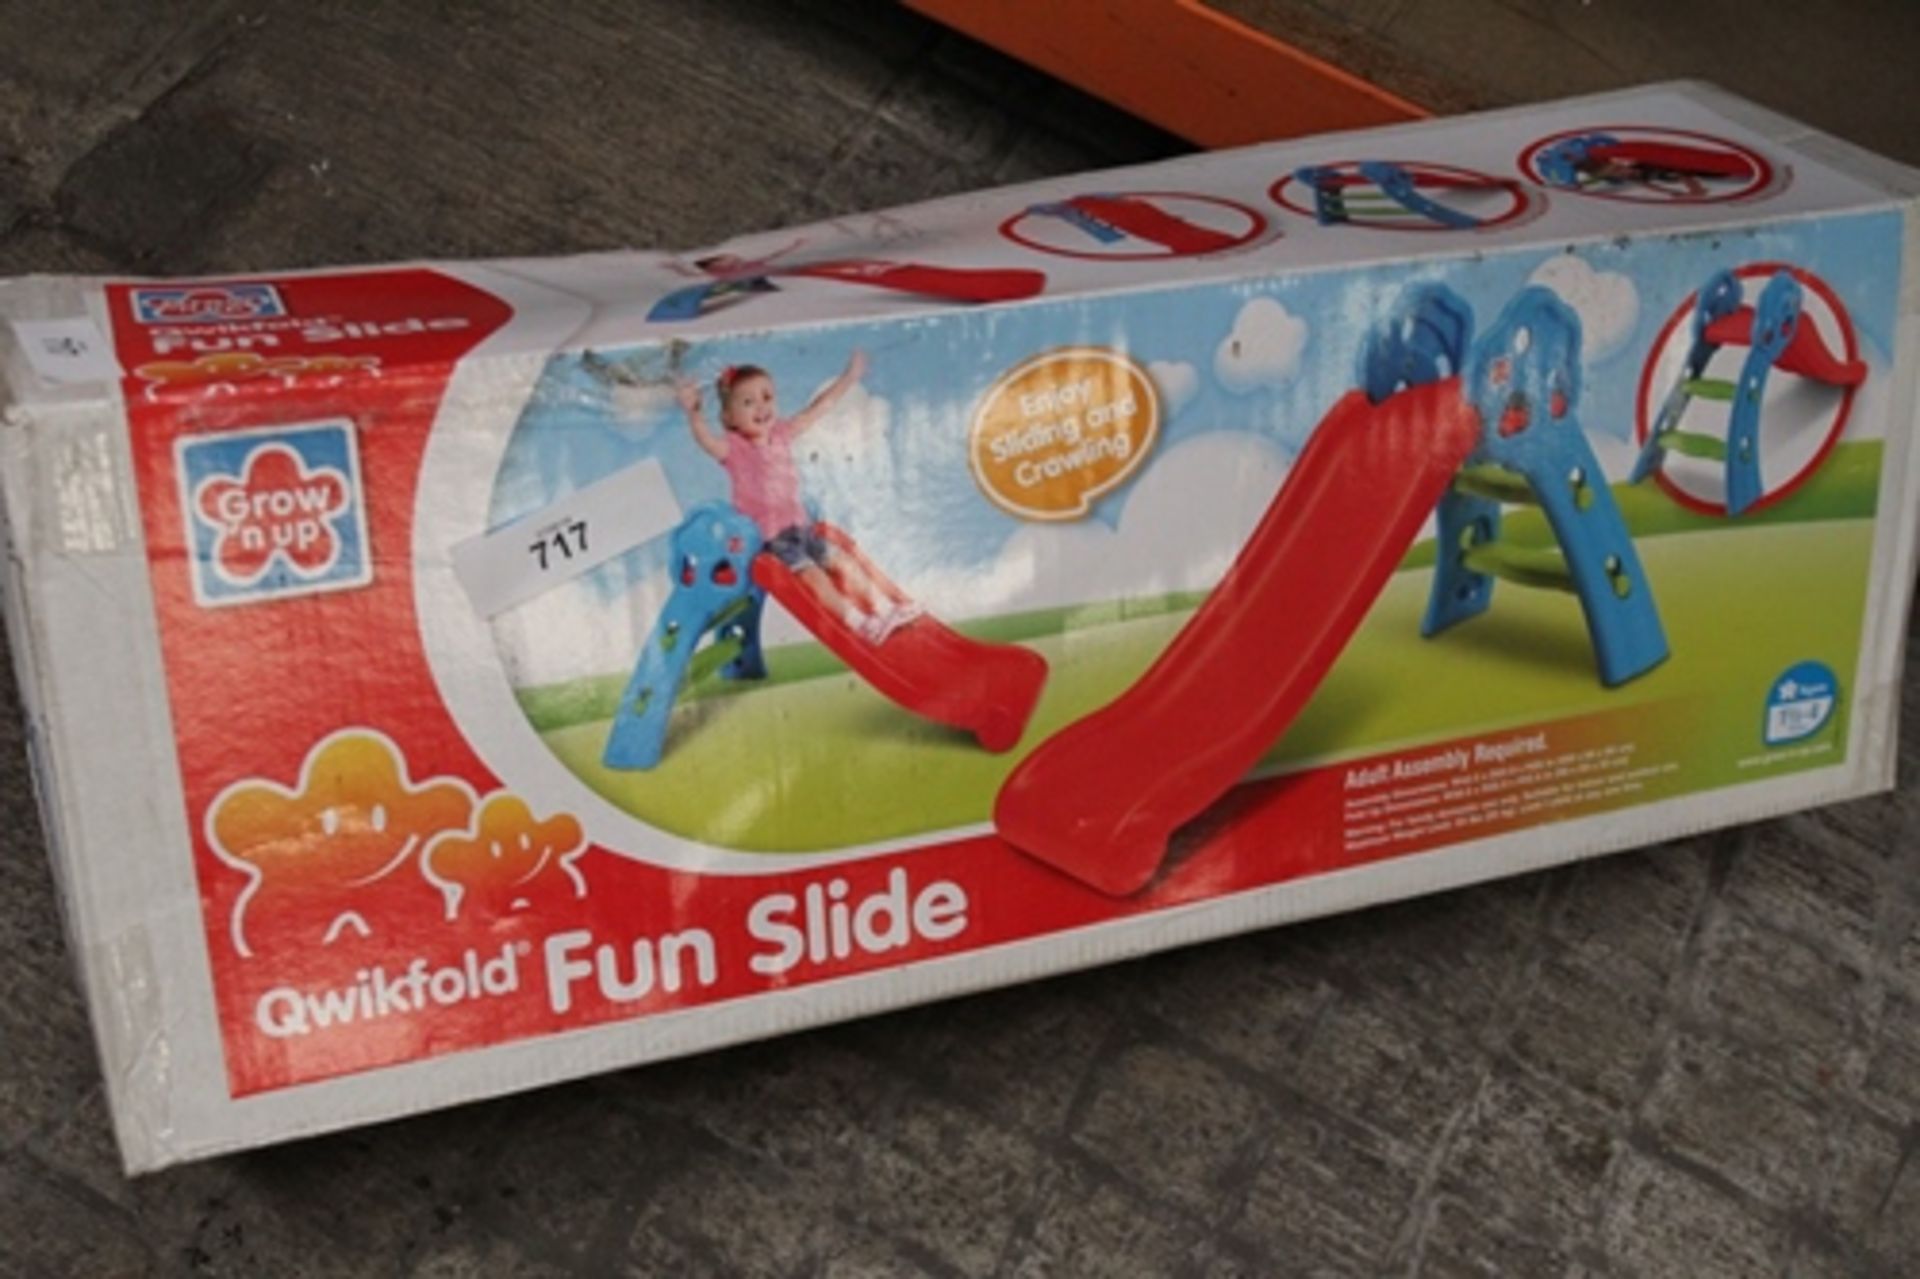 A grow n up, quickfold fun slide. Item number 50103526 - New in open box (27)